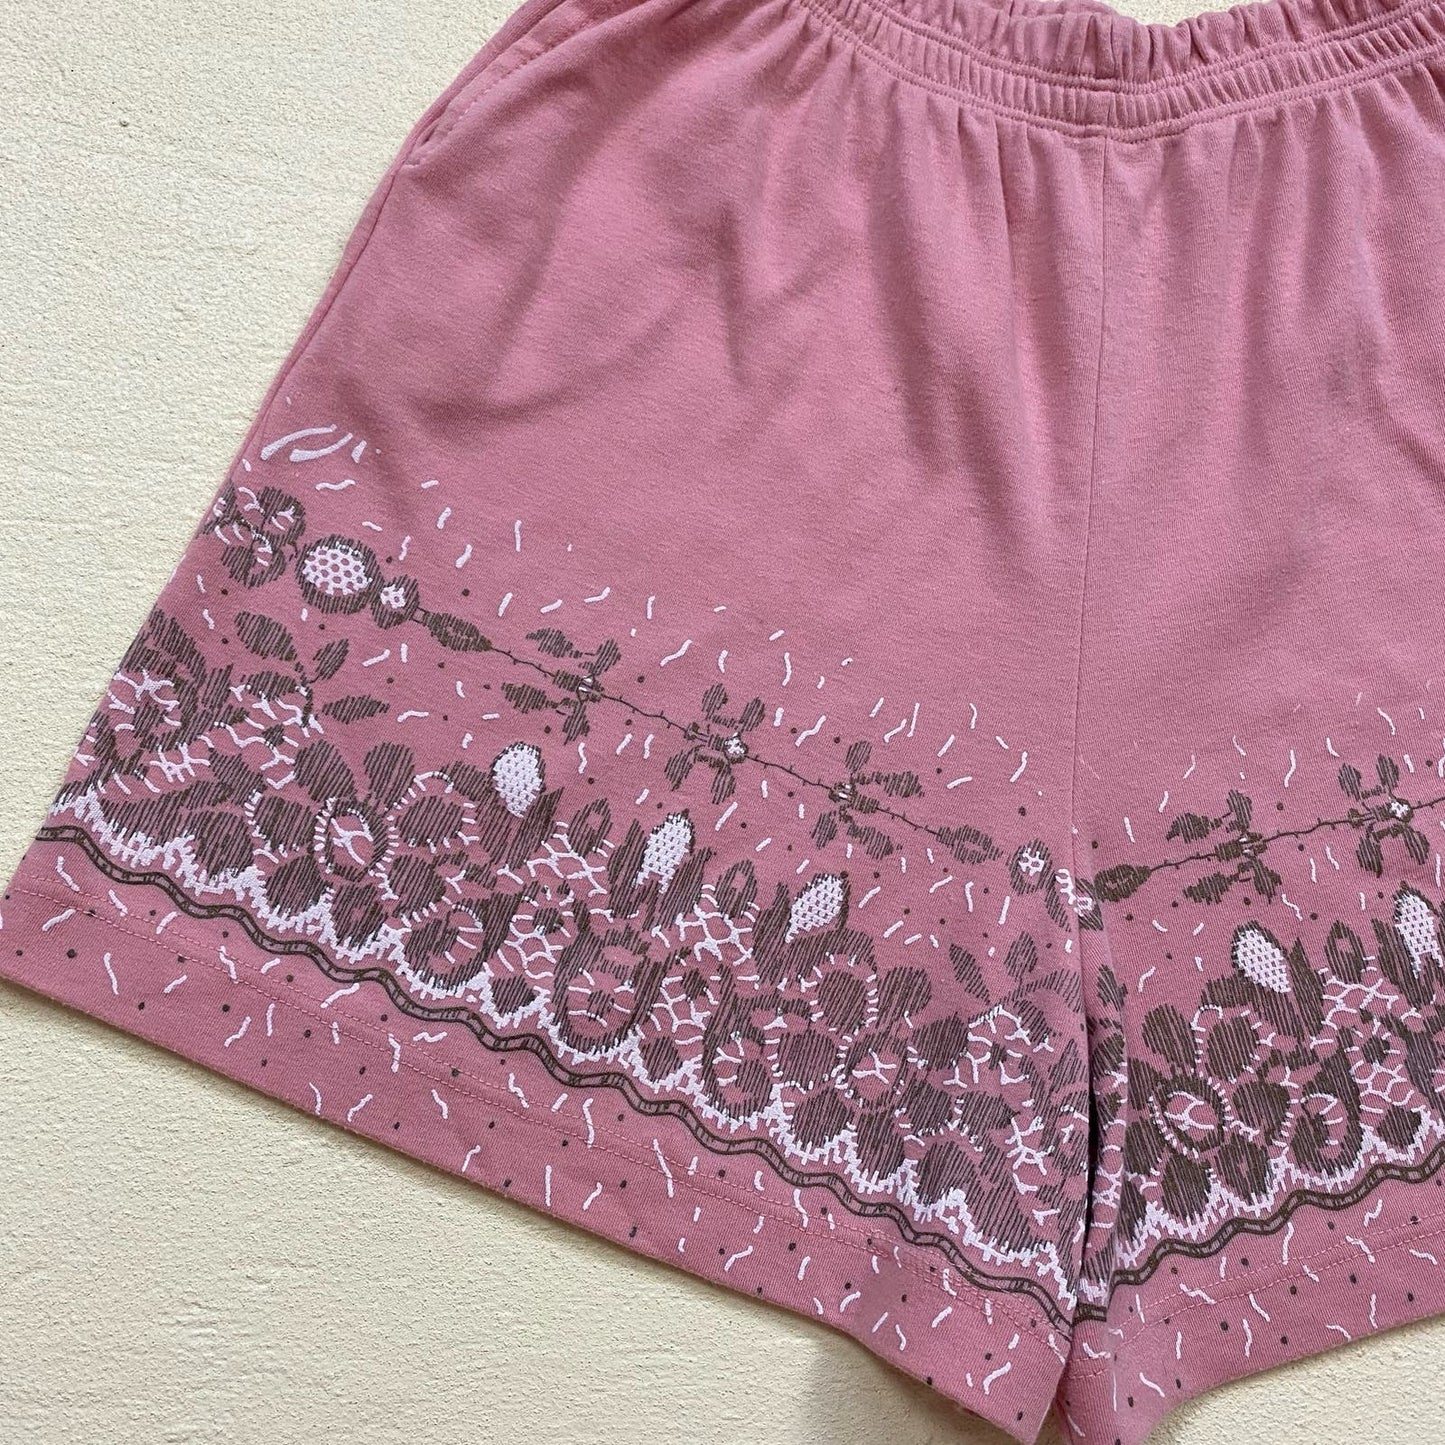 Secondhand Dusty Pink Floral High Waisted Sweat Shorts, Size Small